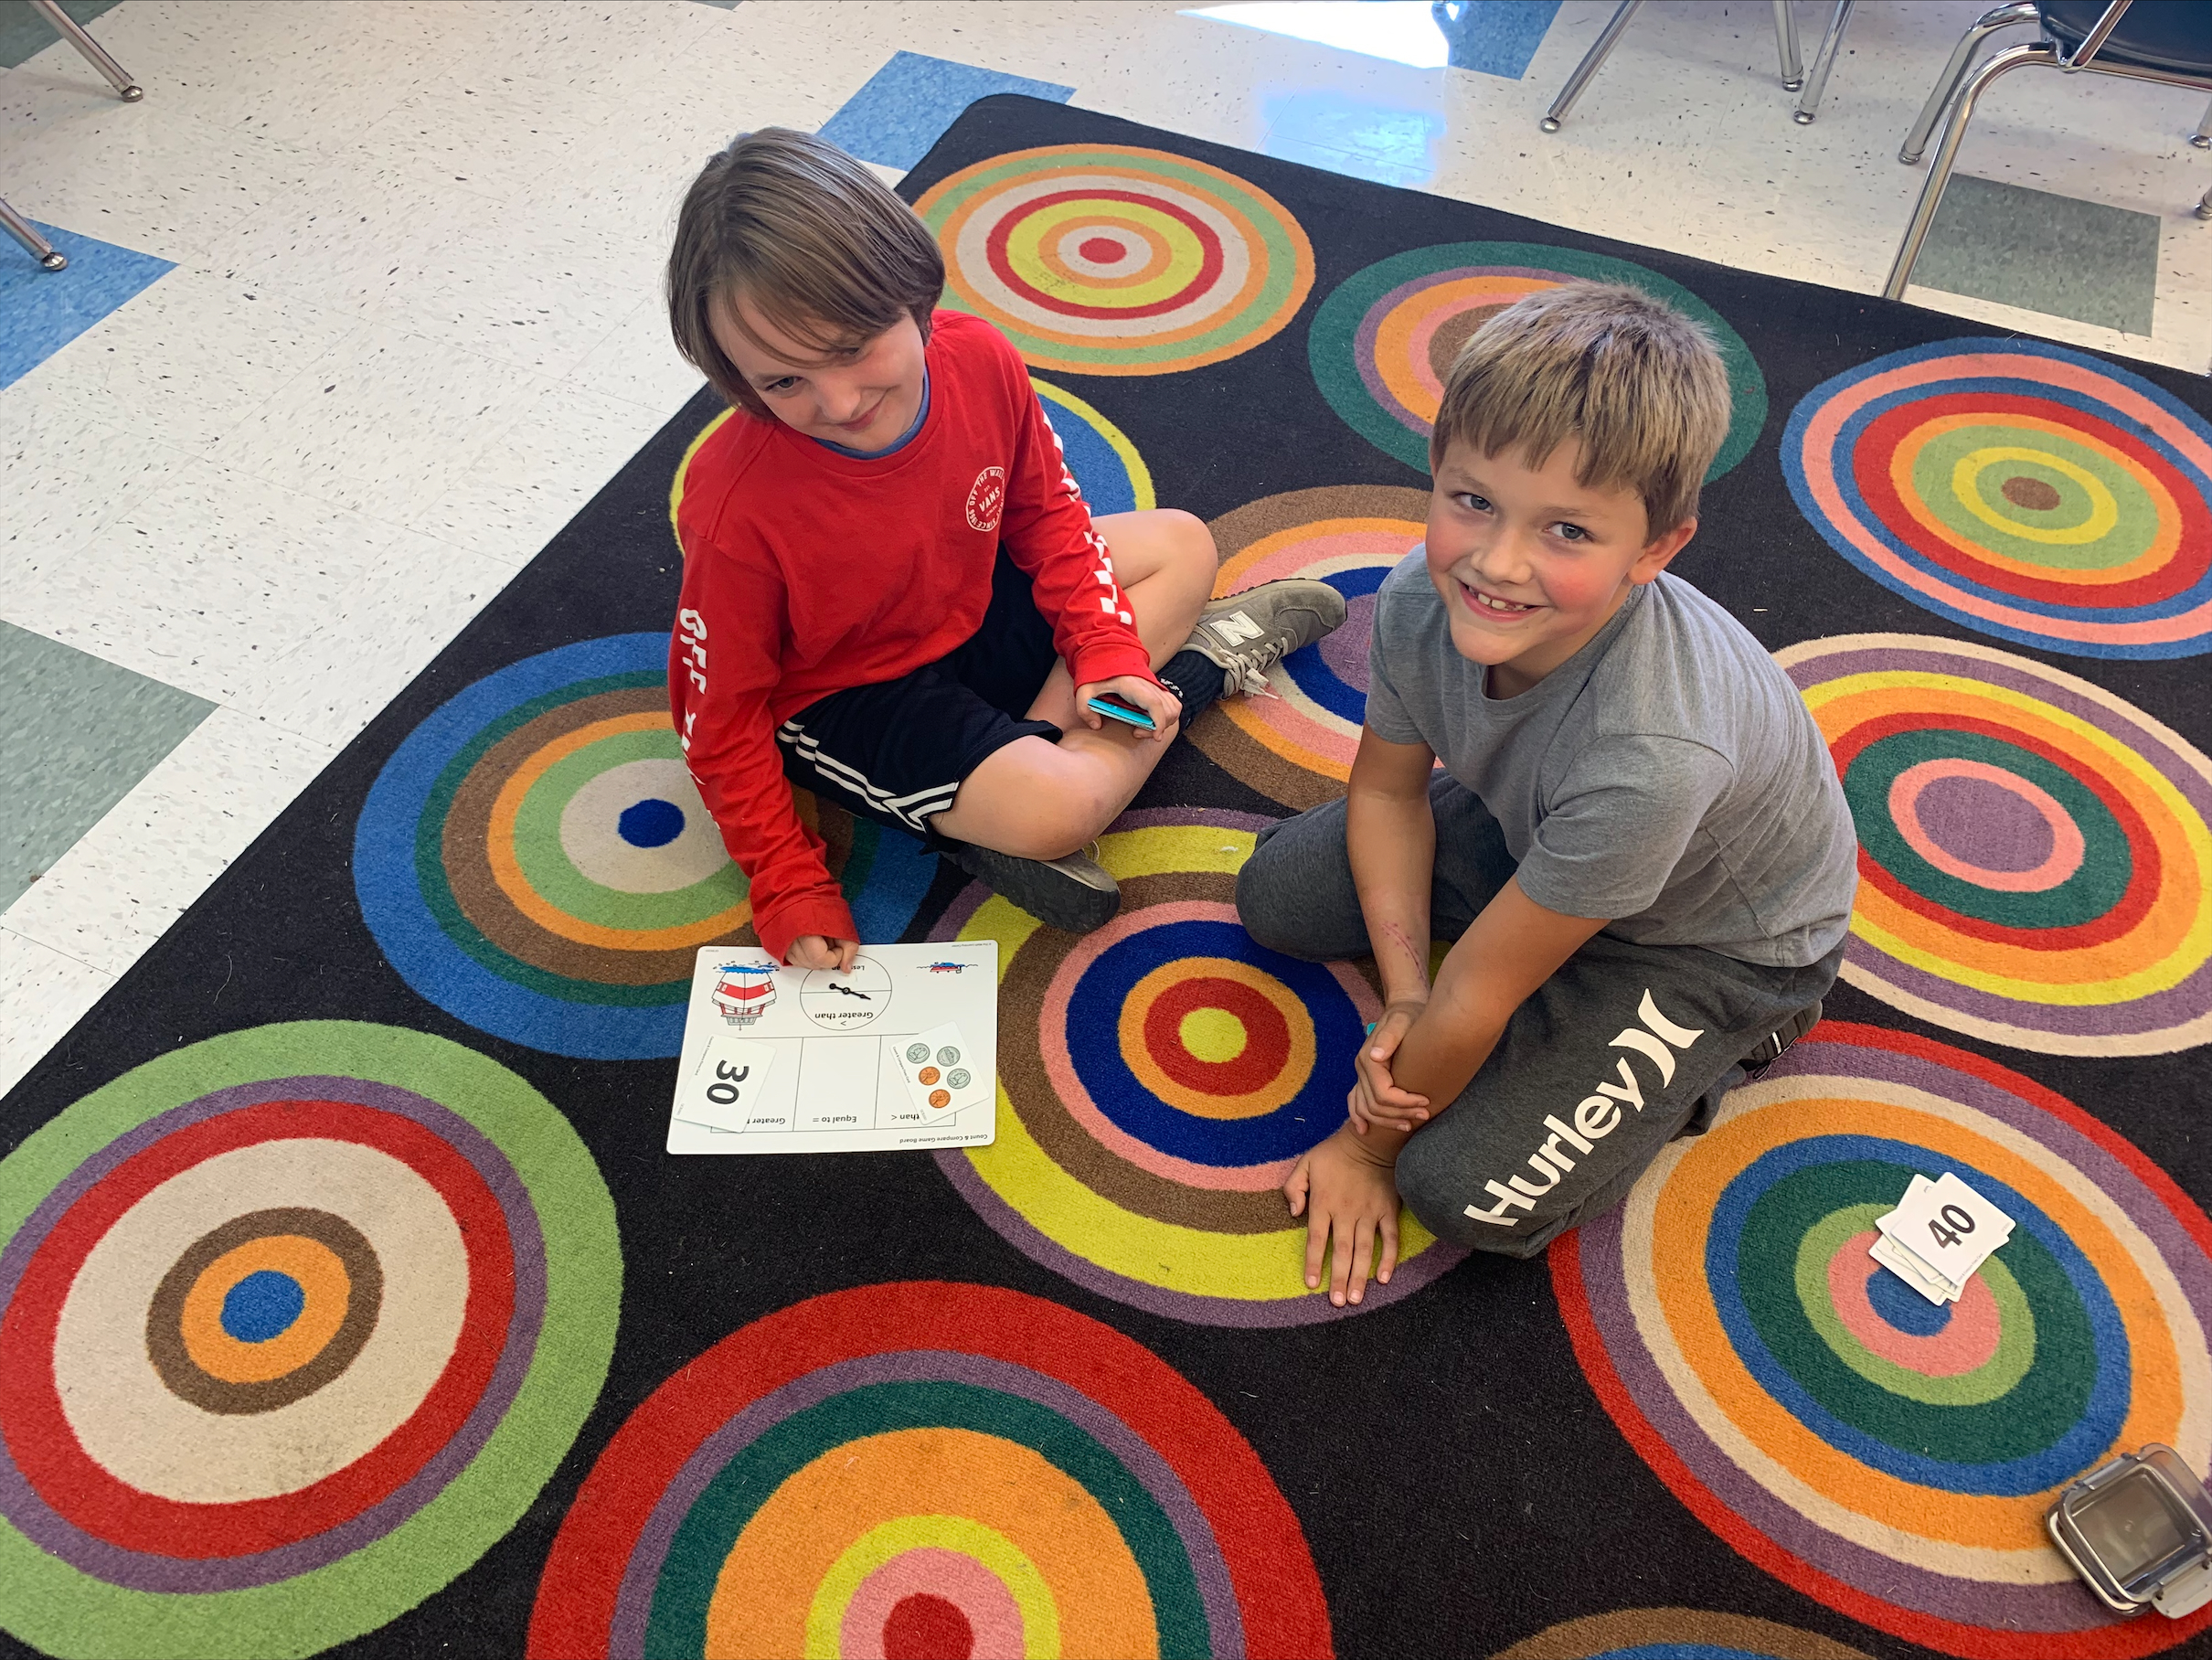 Two elementary students sit on a circle patterned mat playing math games.